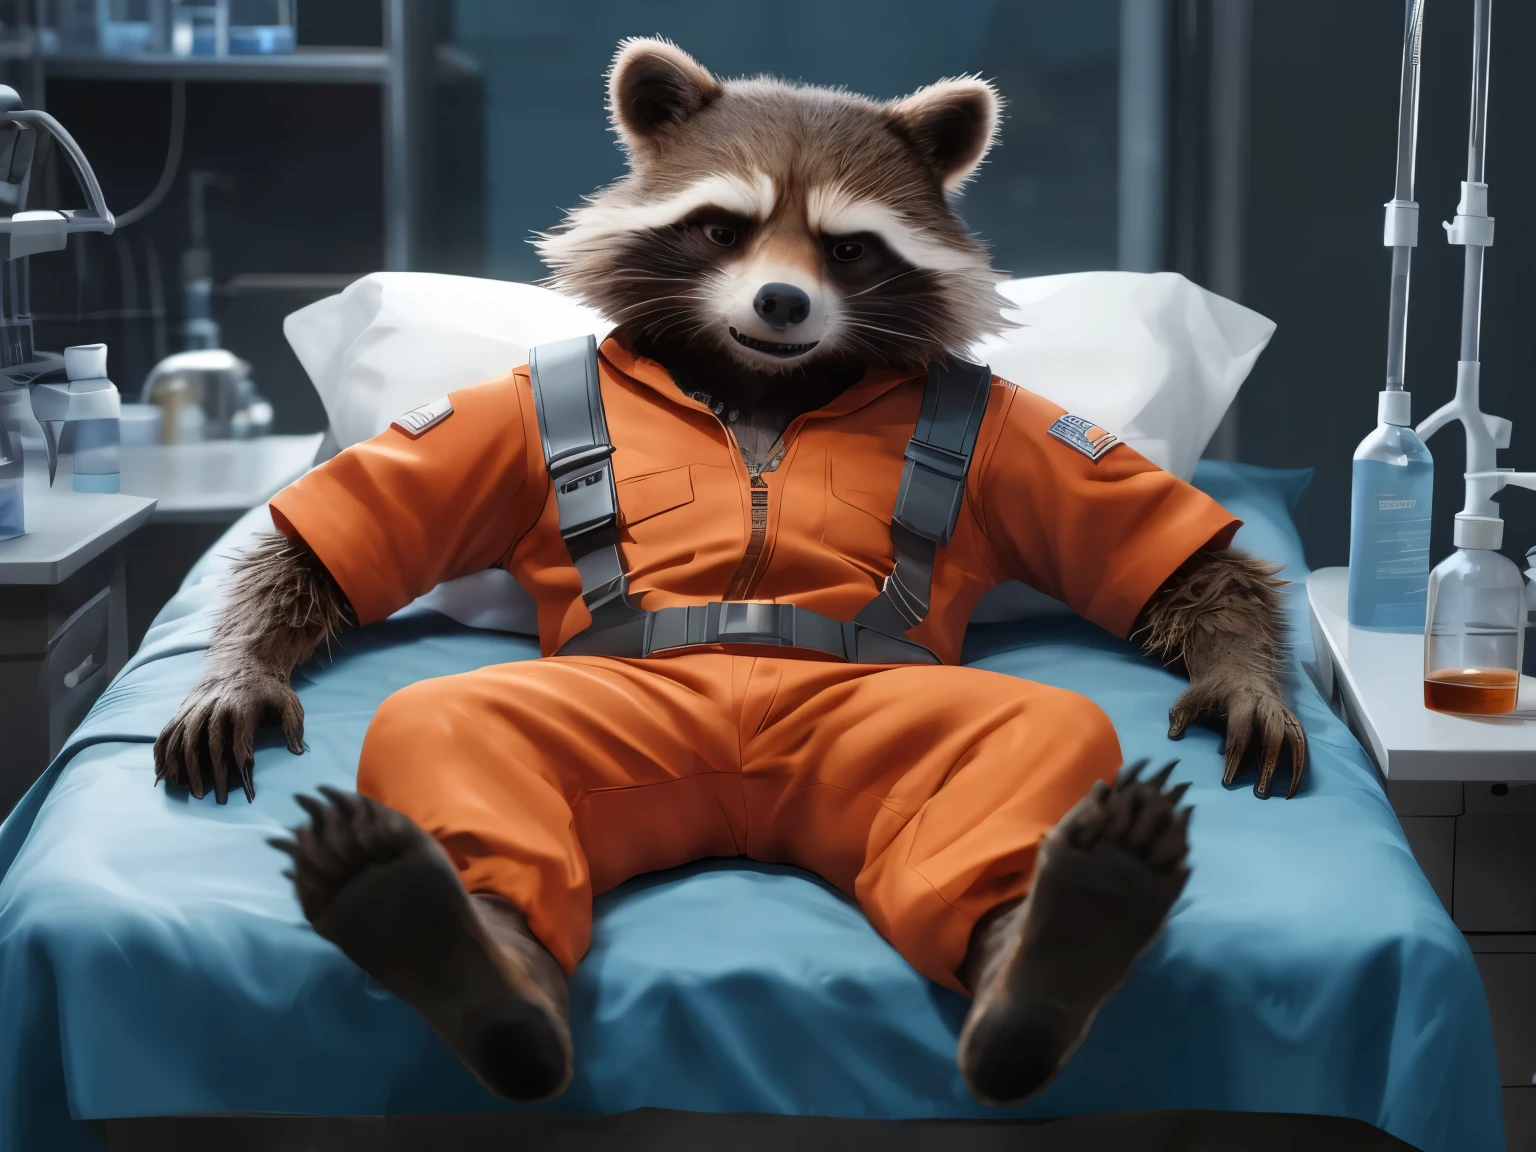 Sedated Rocket Racoon, lying on a bed in a laboratory with his legs spread, drugged with sedation from a drip, strapped to the bed by his wrists and ankles, resisting to sleep, detailed nice big paws with short claws, wears orange prison uniform, MCU vivid colour style, dark brown and gray and white fur, visible soles, in an orange jumpsuit sitting on a hospital bed, rocket raccoon, anthropomorphic racoon, racoon, rocket, super realistic gritty, raccoon, from guardians of the galaxy, ultra realistic illustration, ultra realistic 3d illustration, realistic illustration, 4k still, photoreal”, pixar zootopia. 3 d rendering, 